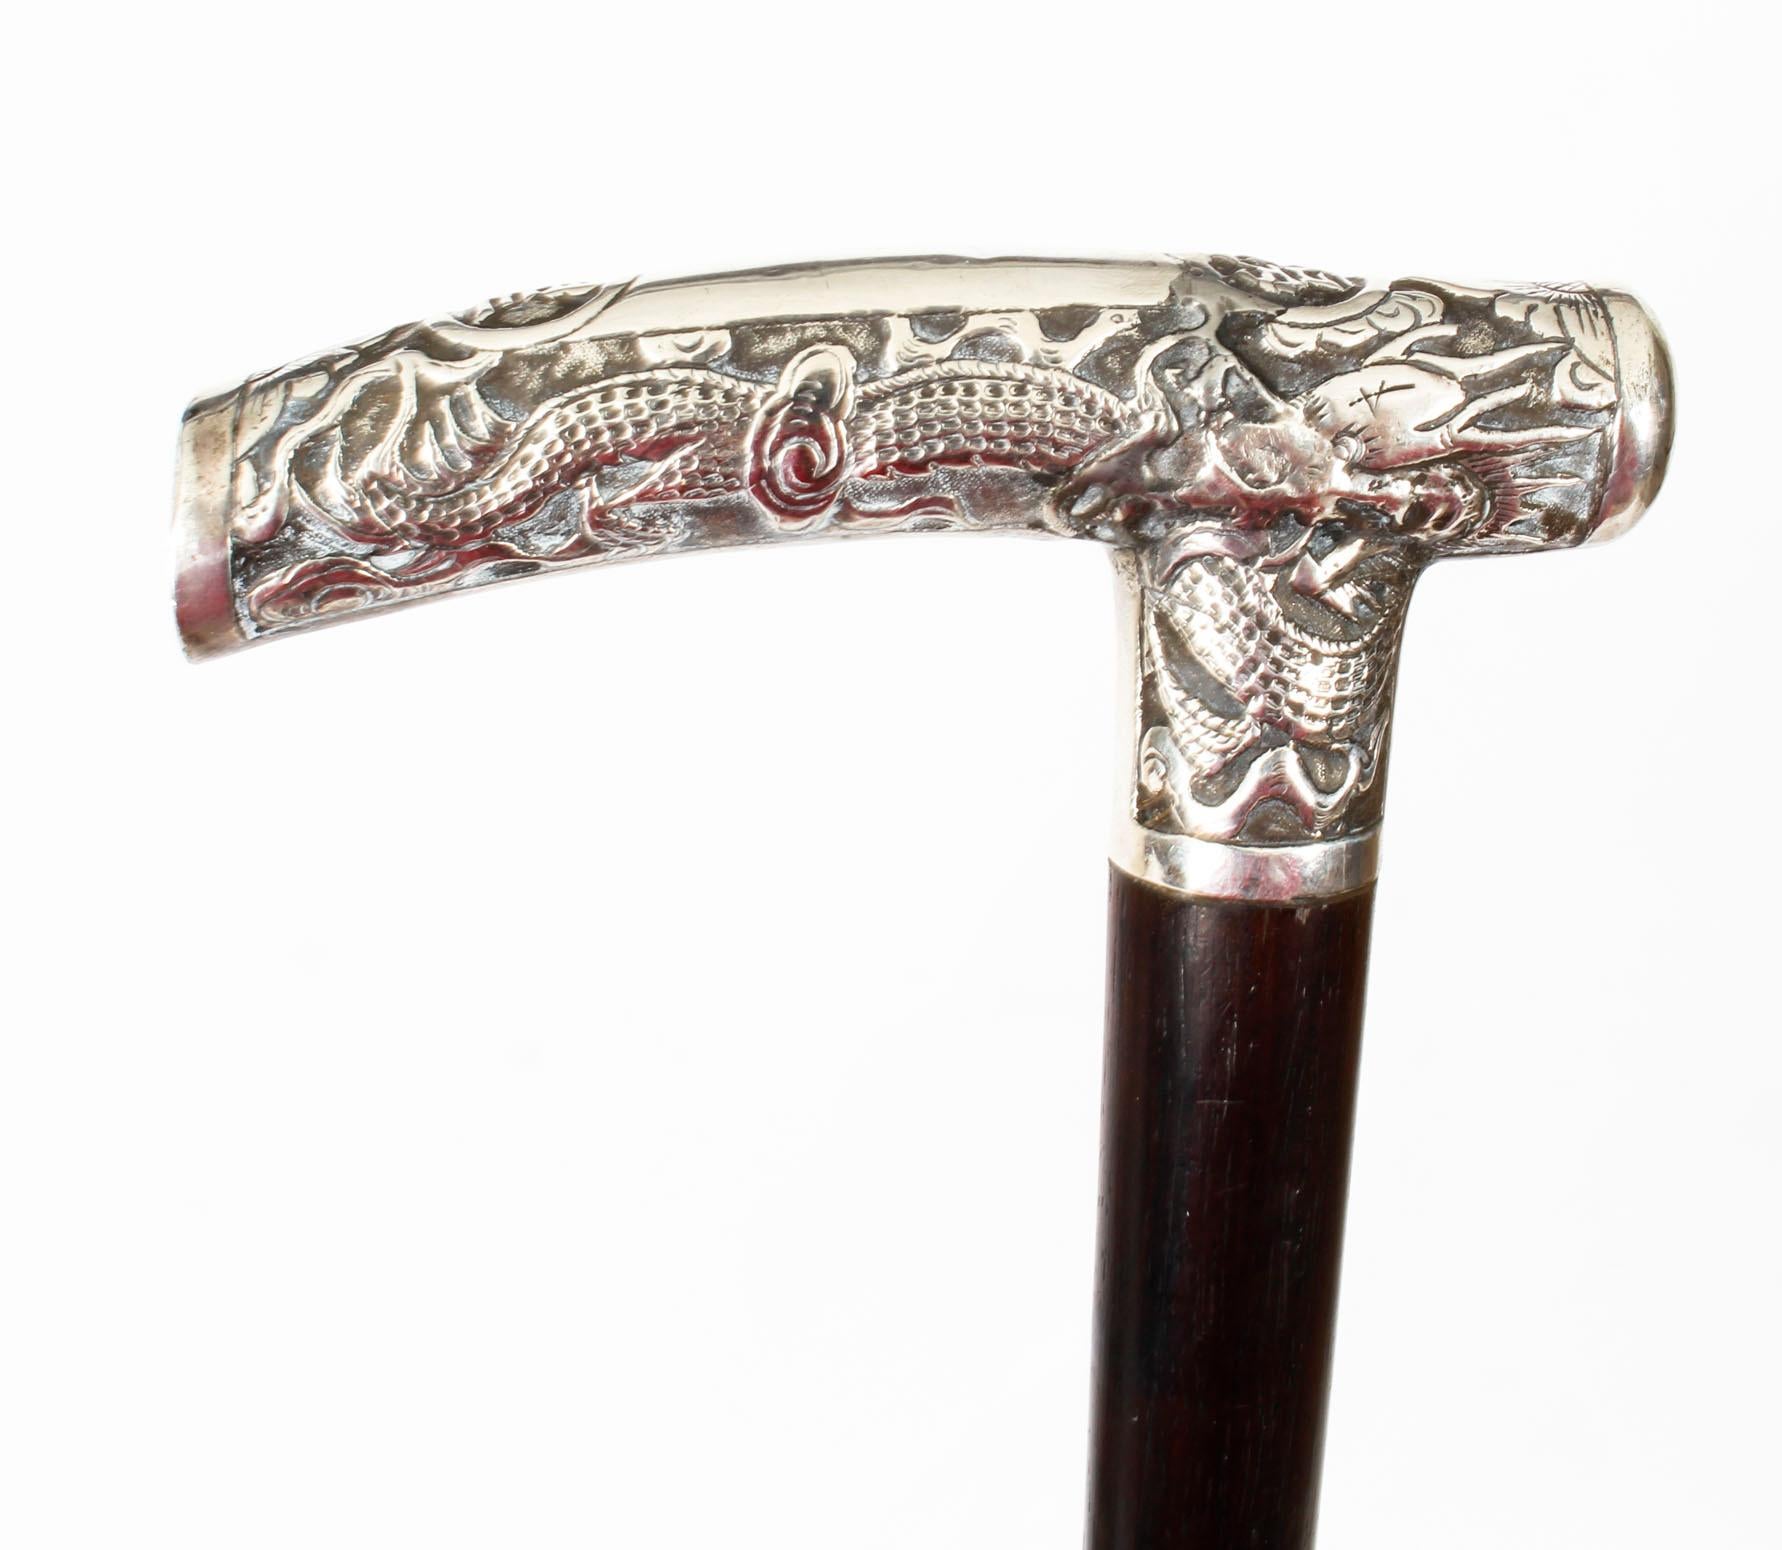 This is a very beautiful antique Chinese gentleman's silver pommel walking stick, circa 1900 in date.

The exquisite L-shaped Chinese silver pommel is superbly decorated with figures amongst pagodas and bamboo and is further embellished with a